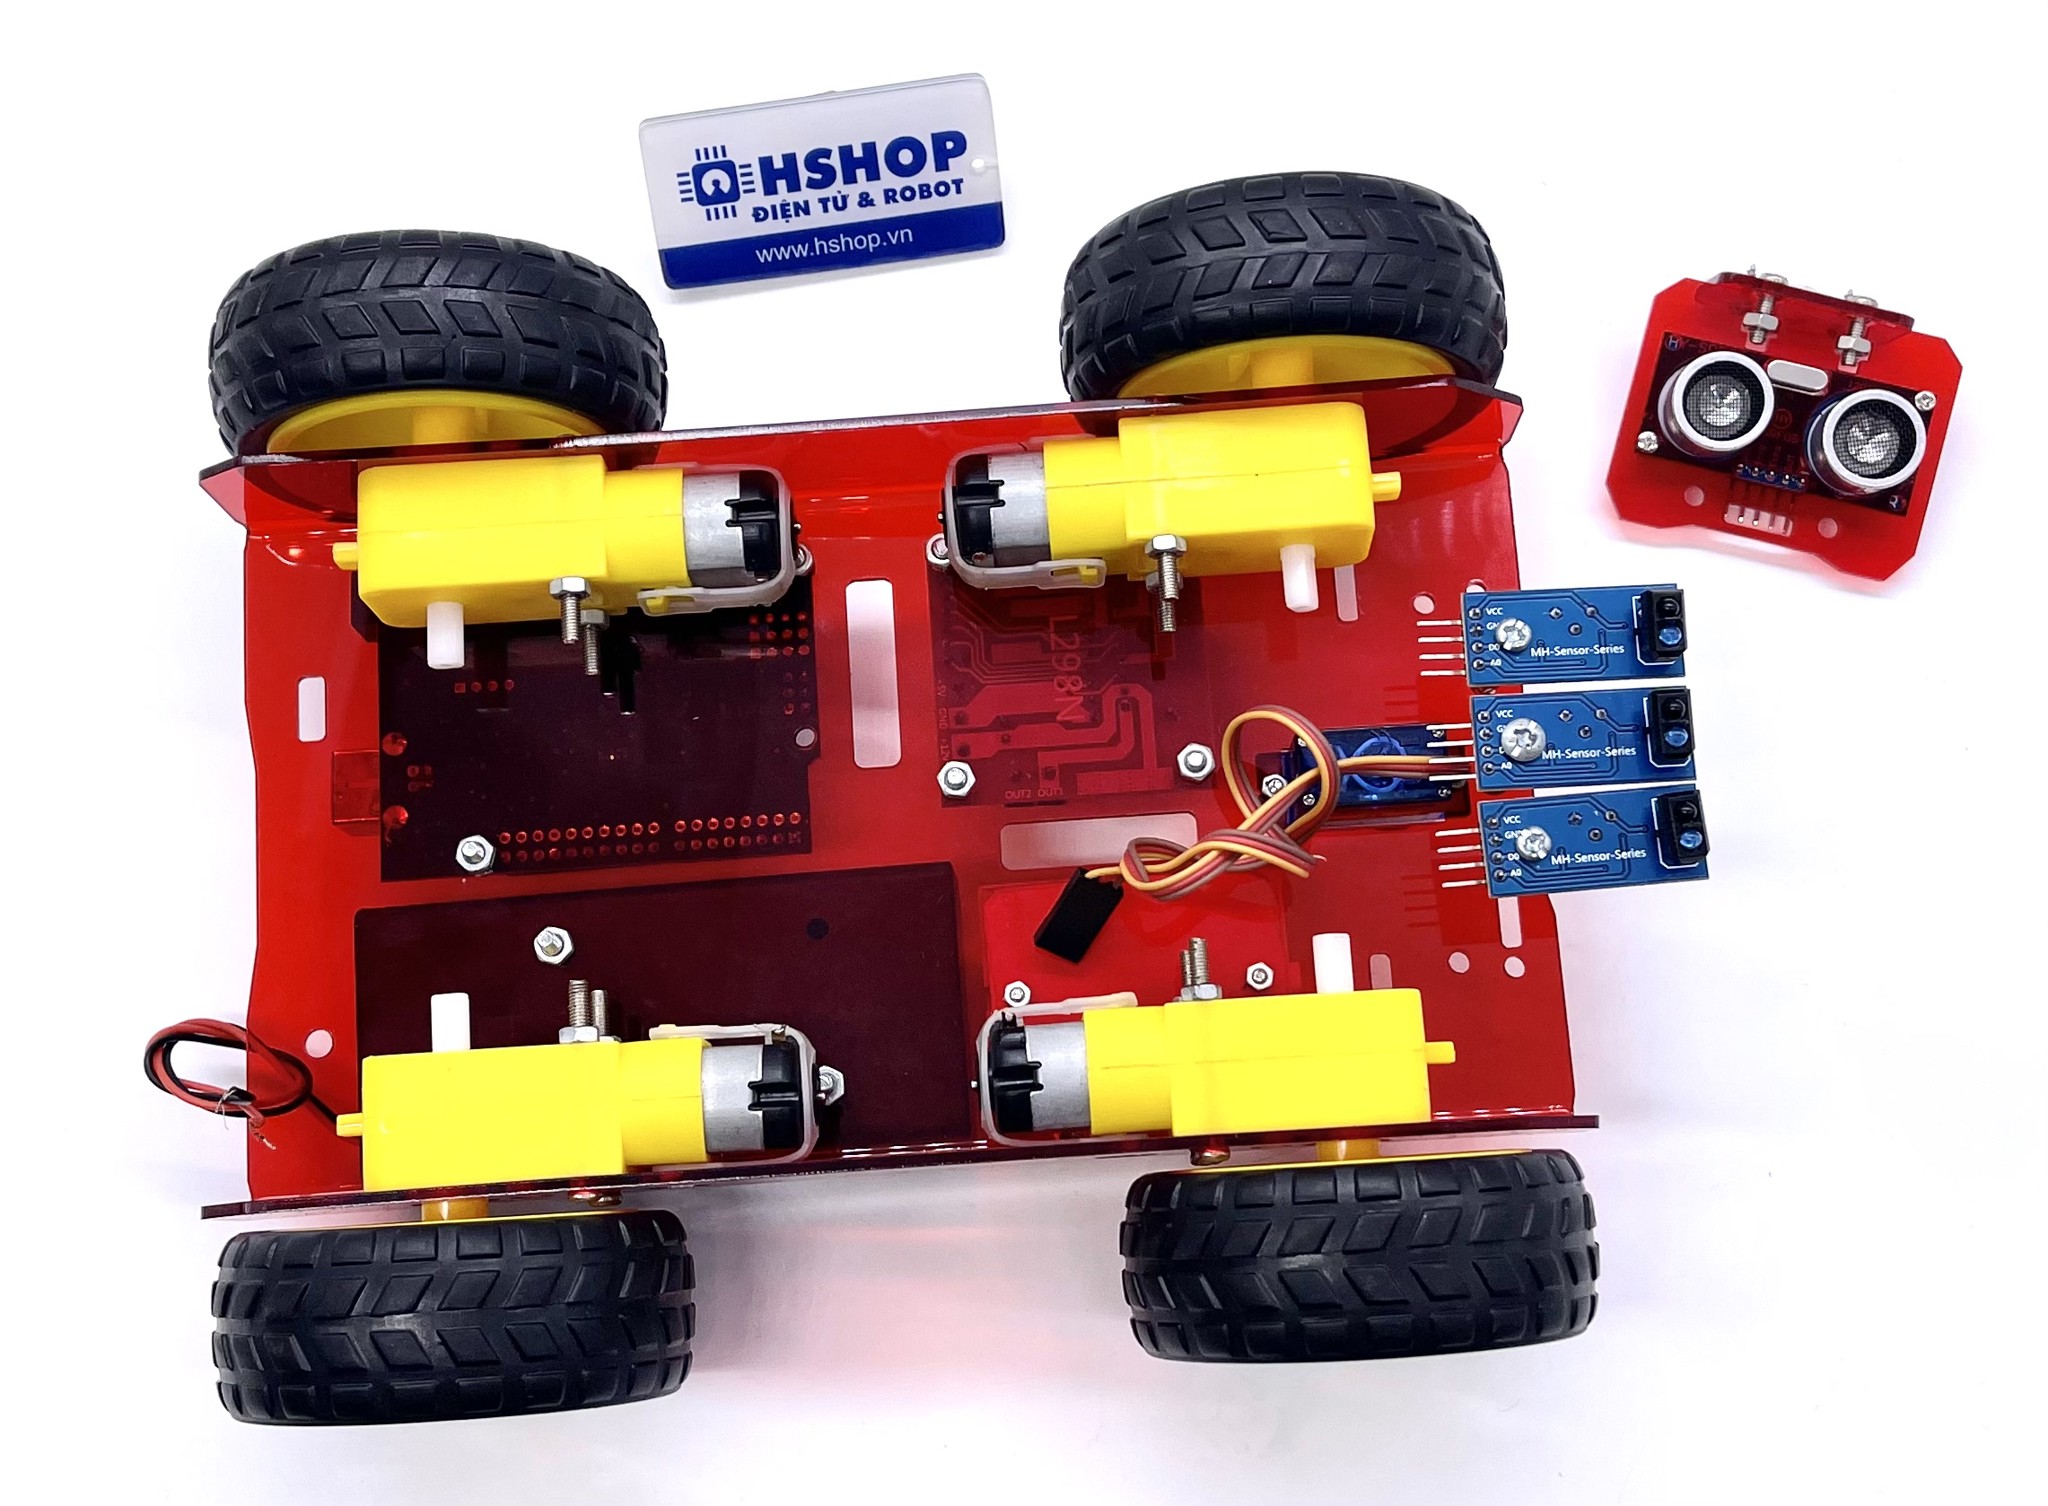 Khung xe Robot Chasiss 4WD Car R1